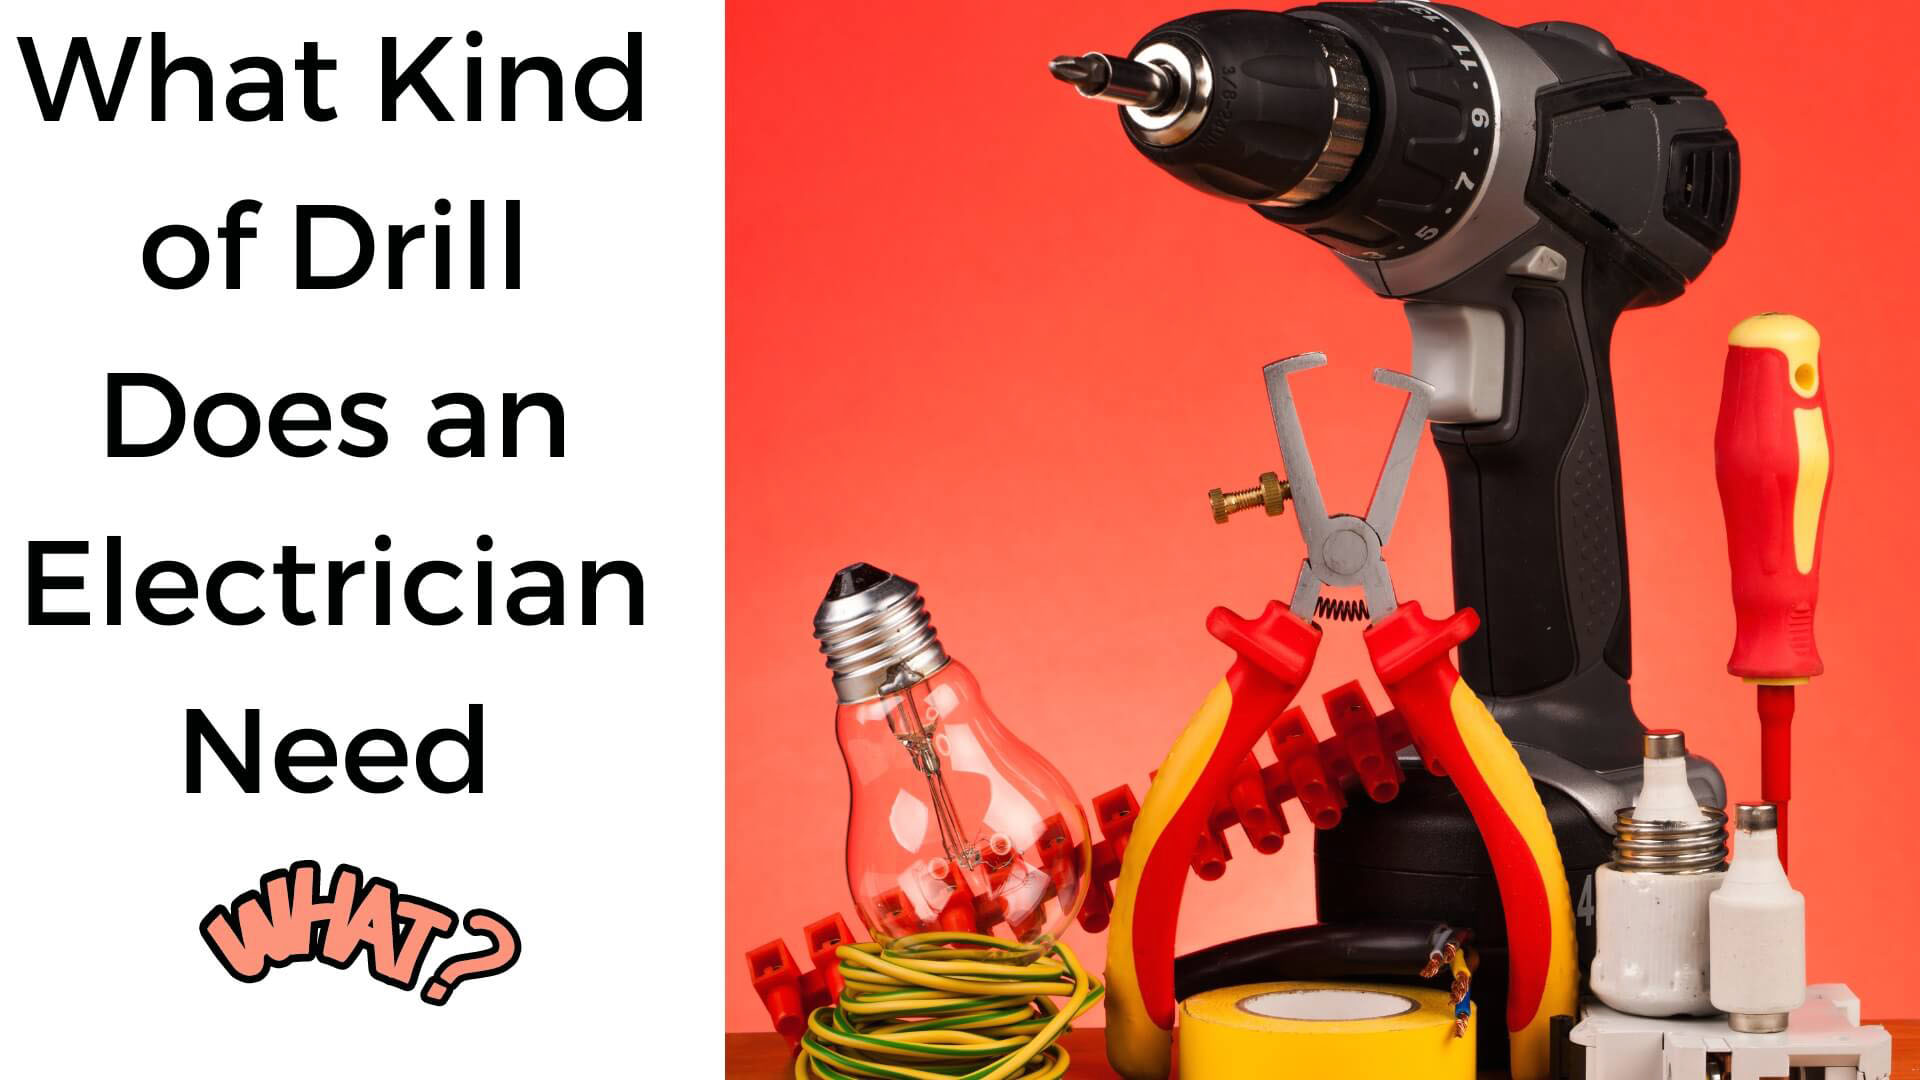 what kind of drill does an electrician need?